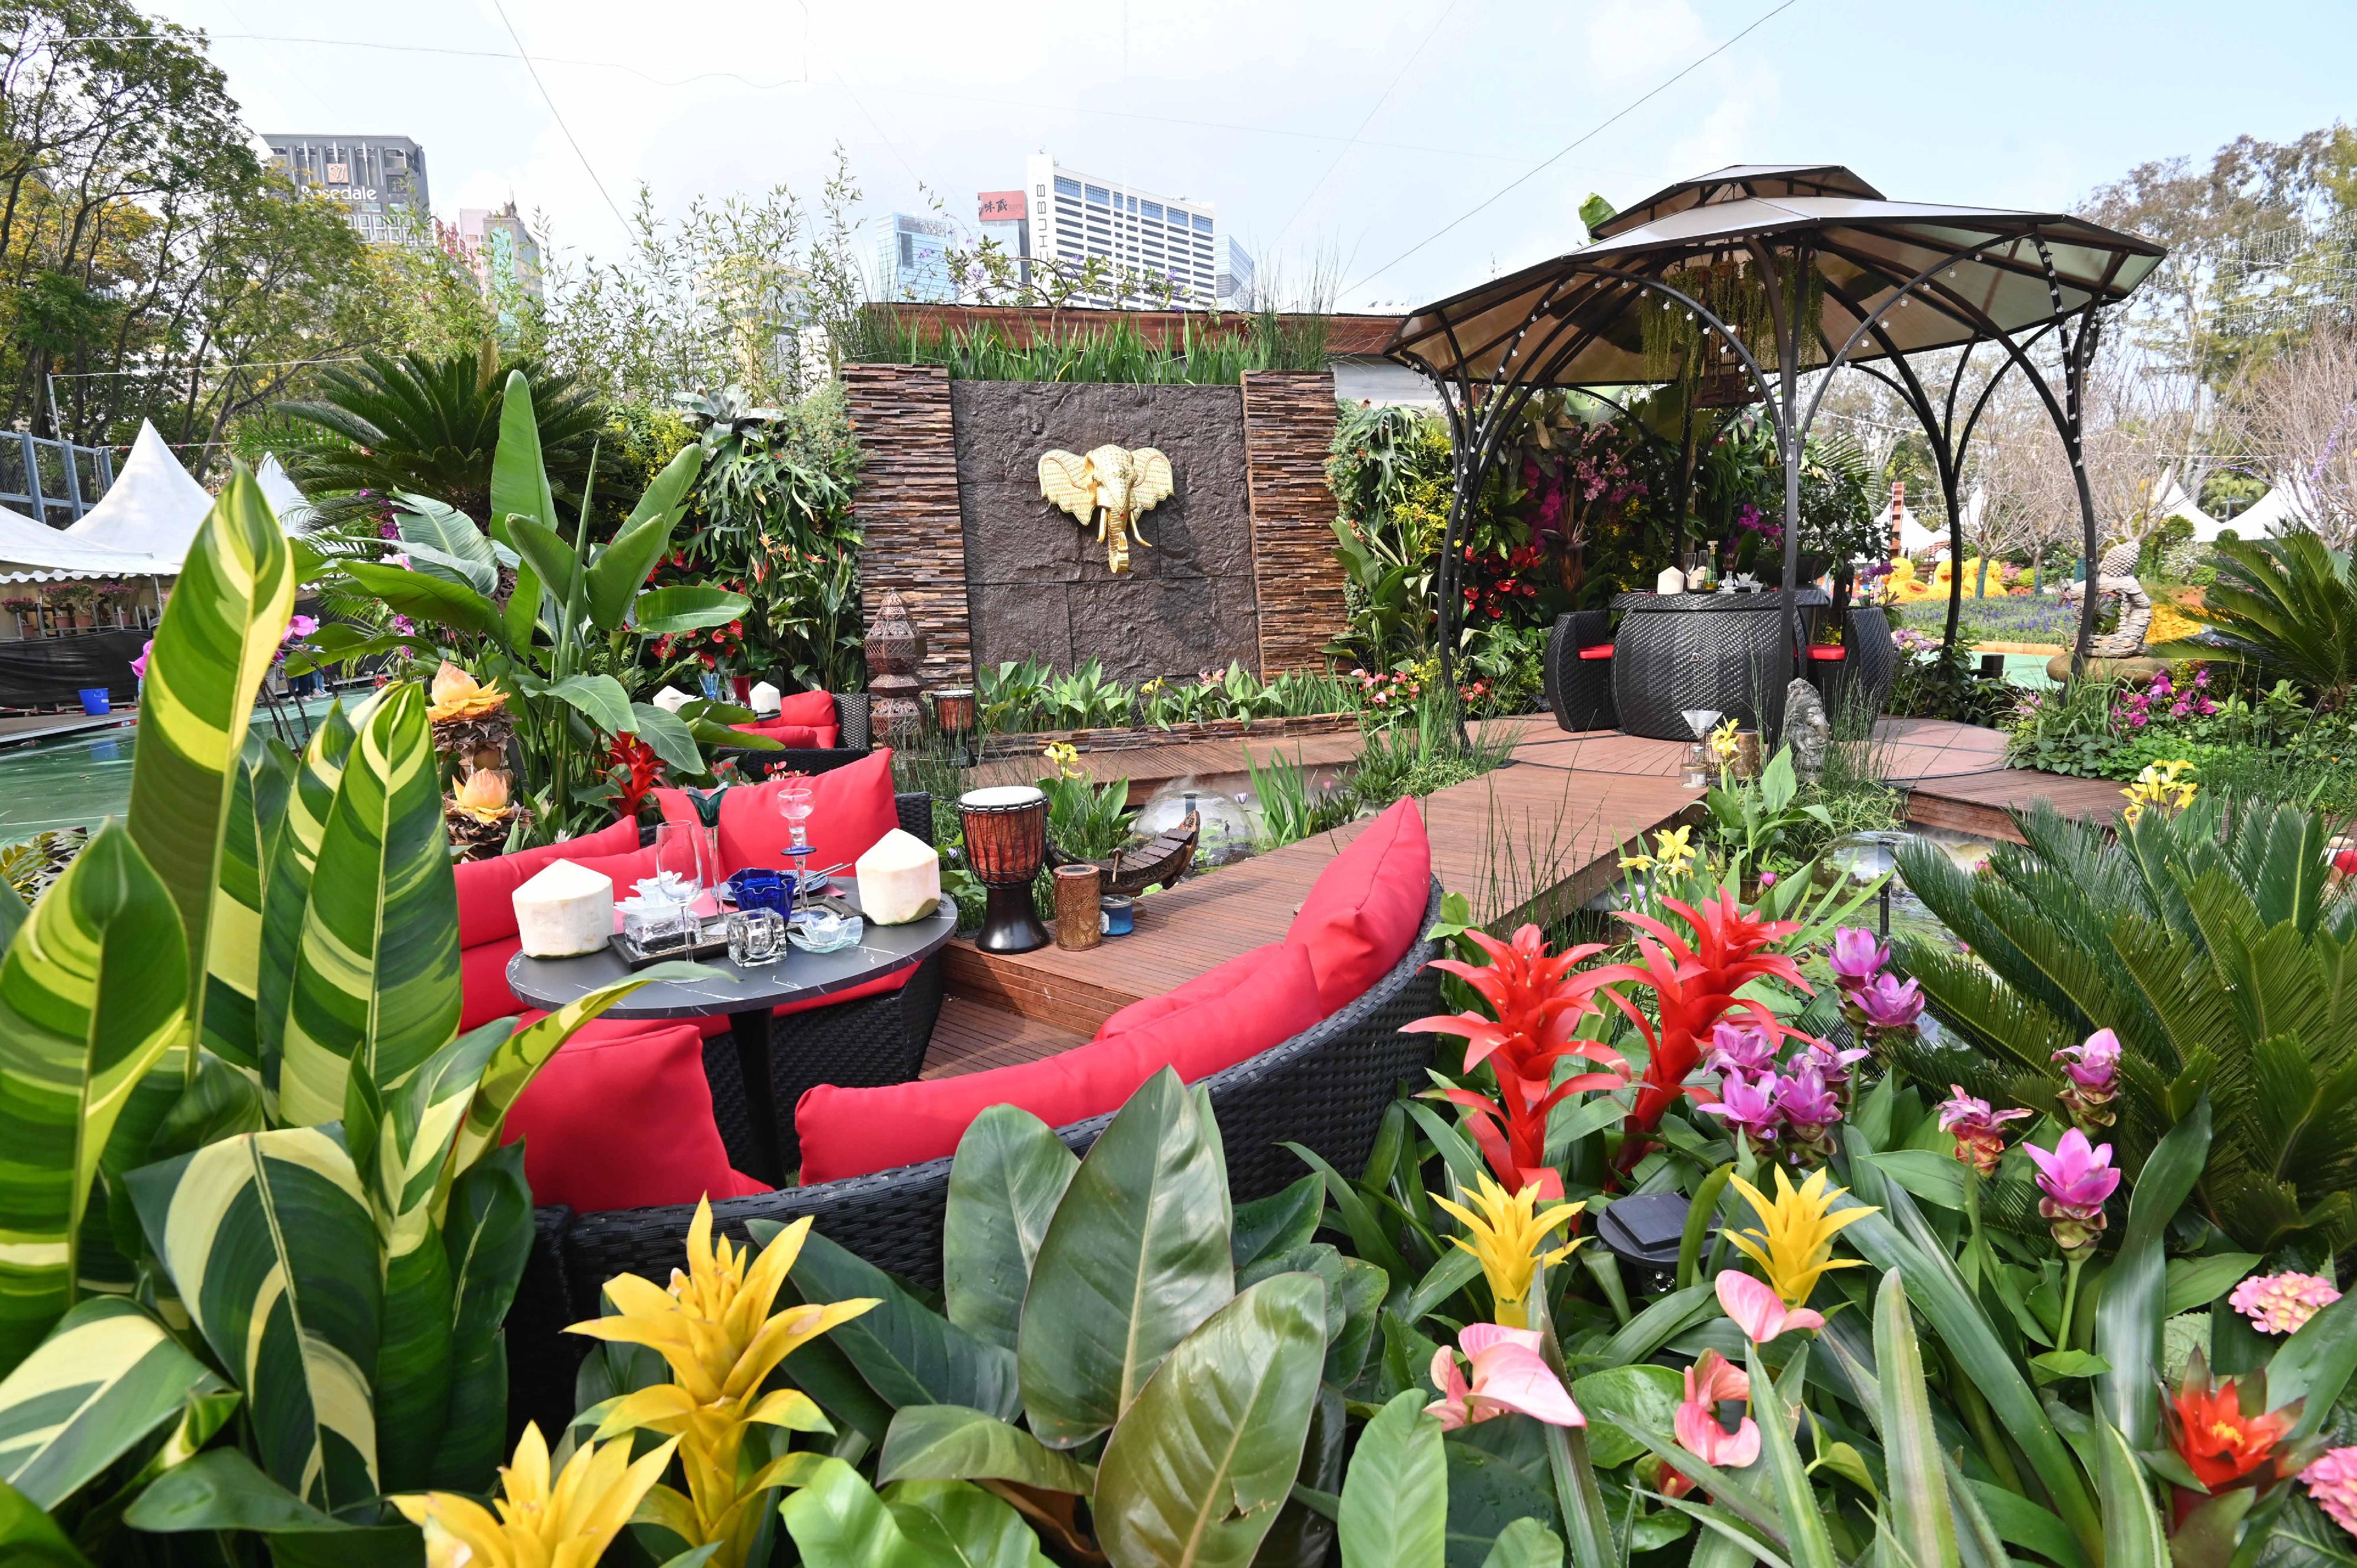 The Hong Kong Flower Show 2023 (HKFS) is currently running at Victoria Park. The winning entries of the Oriental Style Garden Plot Competition and Western Style Garden Plot Competition, one of the HKFS's activities, are also on display at the showground. Photo shows Sha Tin District's "Thai-style Teahouse", which is the winner of the Oriental Style Garden Plot Competition.